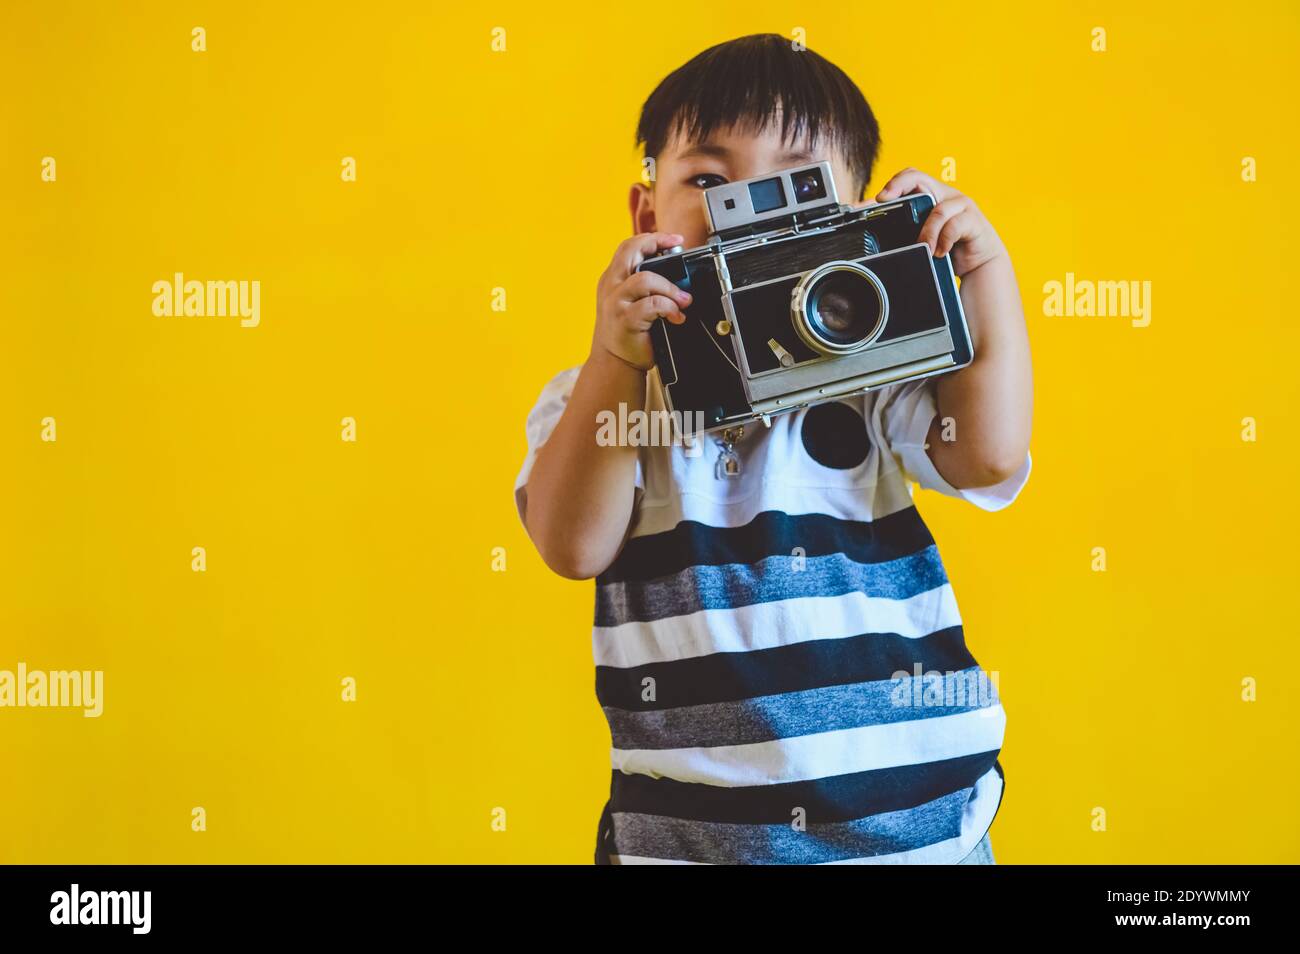 Asian boy holding old vintage camera and posing as photography on yellow isolated background. People lifestyle and technology concept. Stock Photo